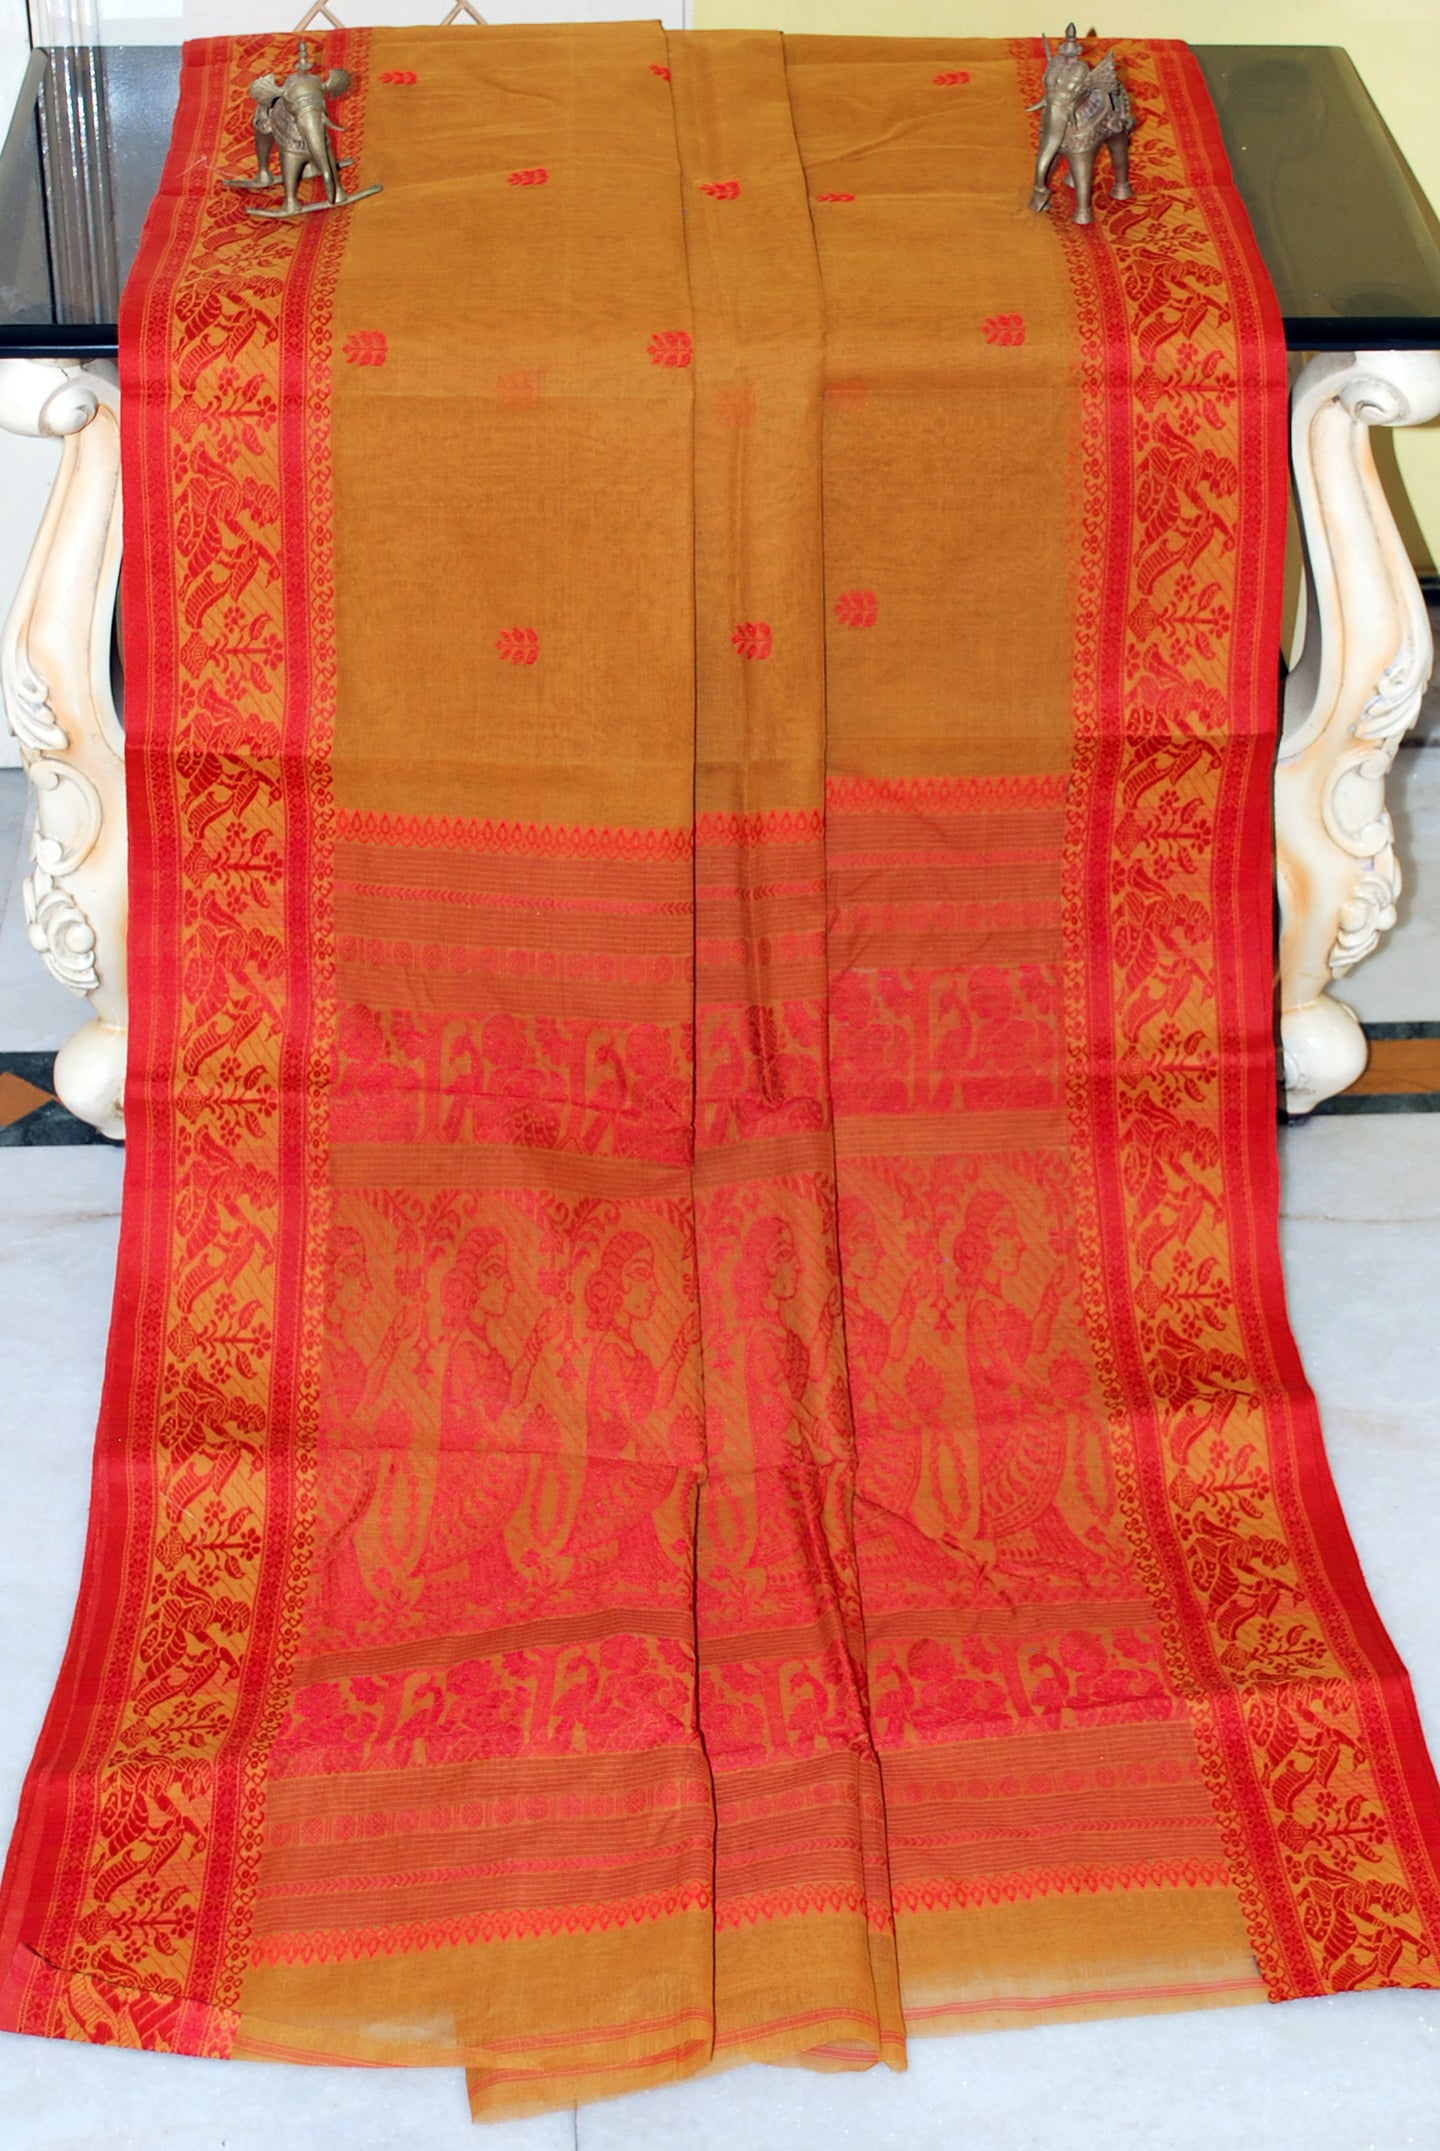 Bengal Handloom Cotton Baluchari Saree in Copper Brown and Red